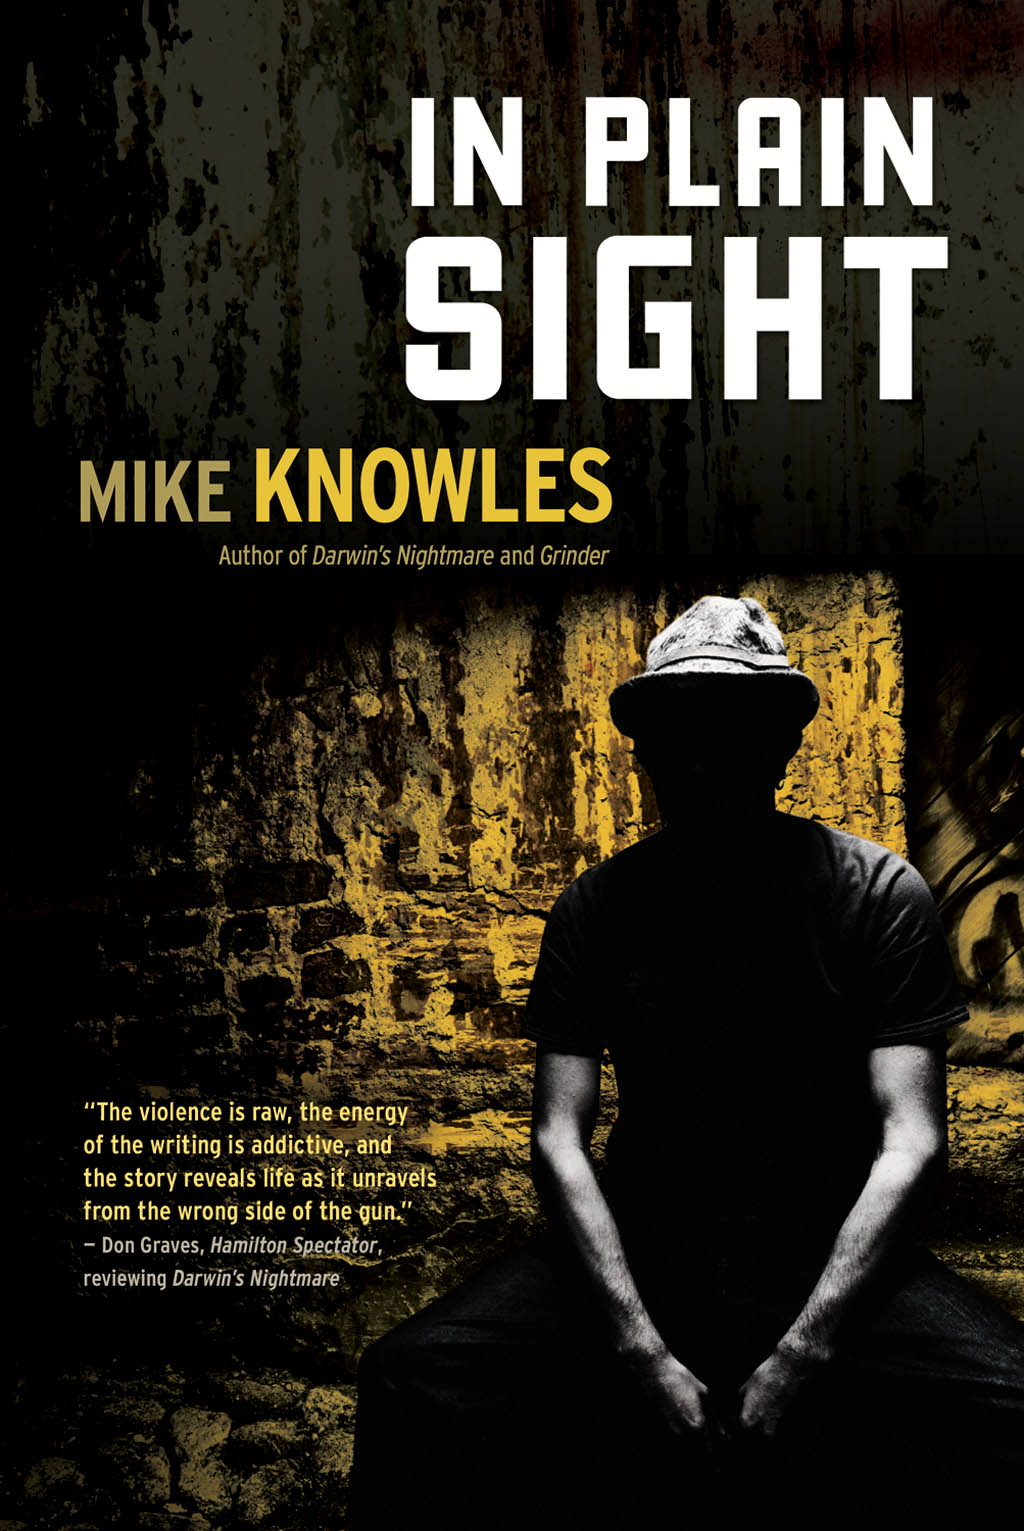 In Plain Sight by Mike Knowles